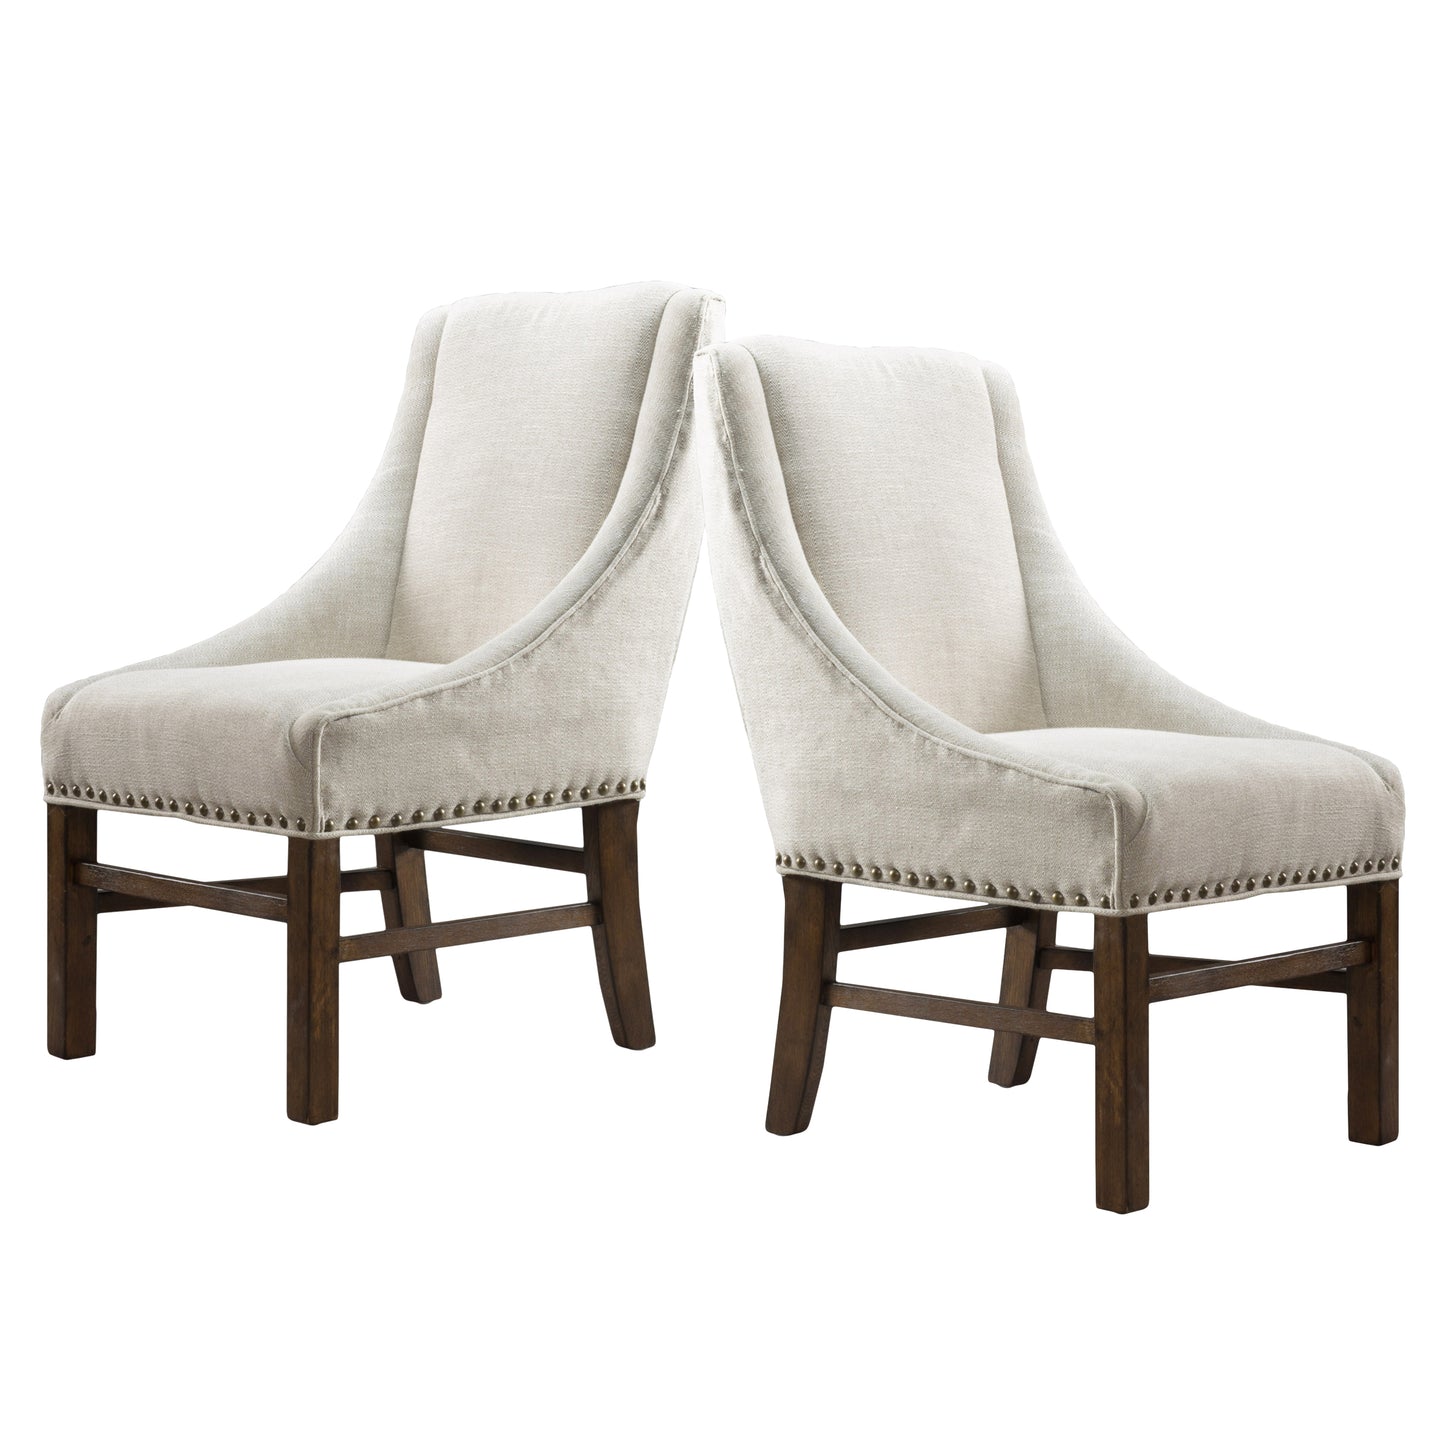 Claudia Contemporary Fabric Upholstered Dining Chair